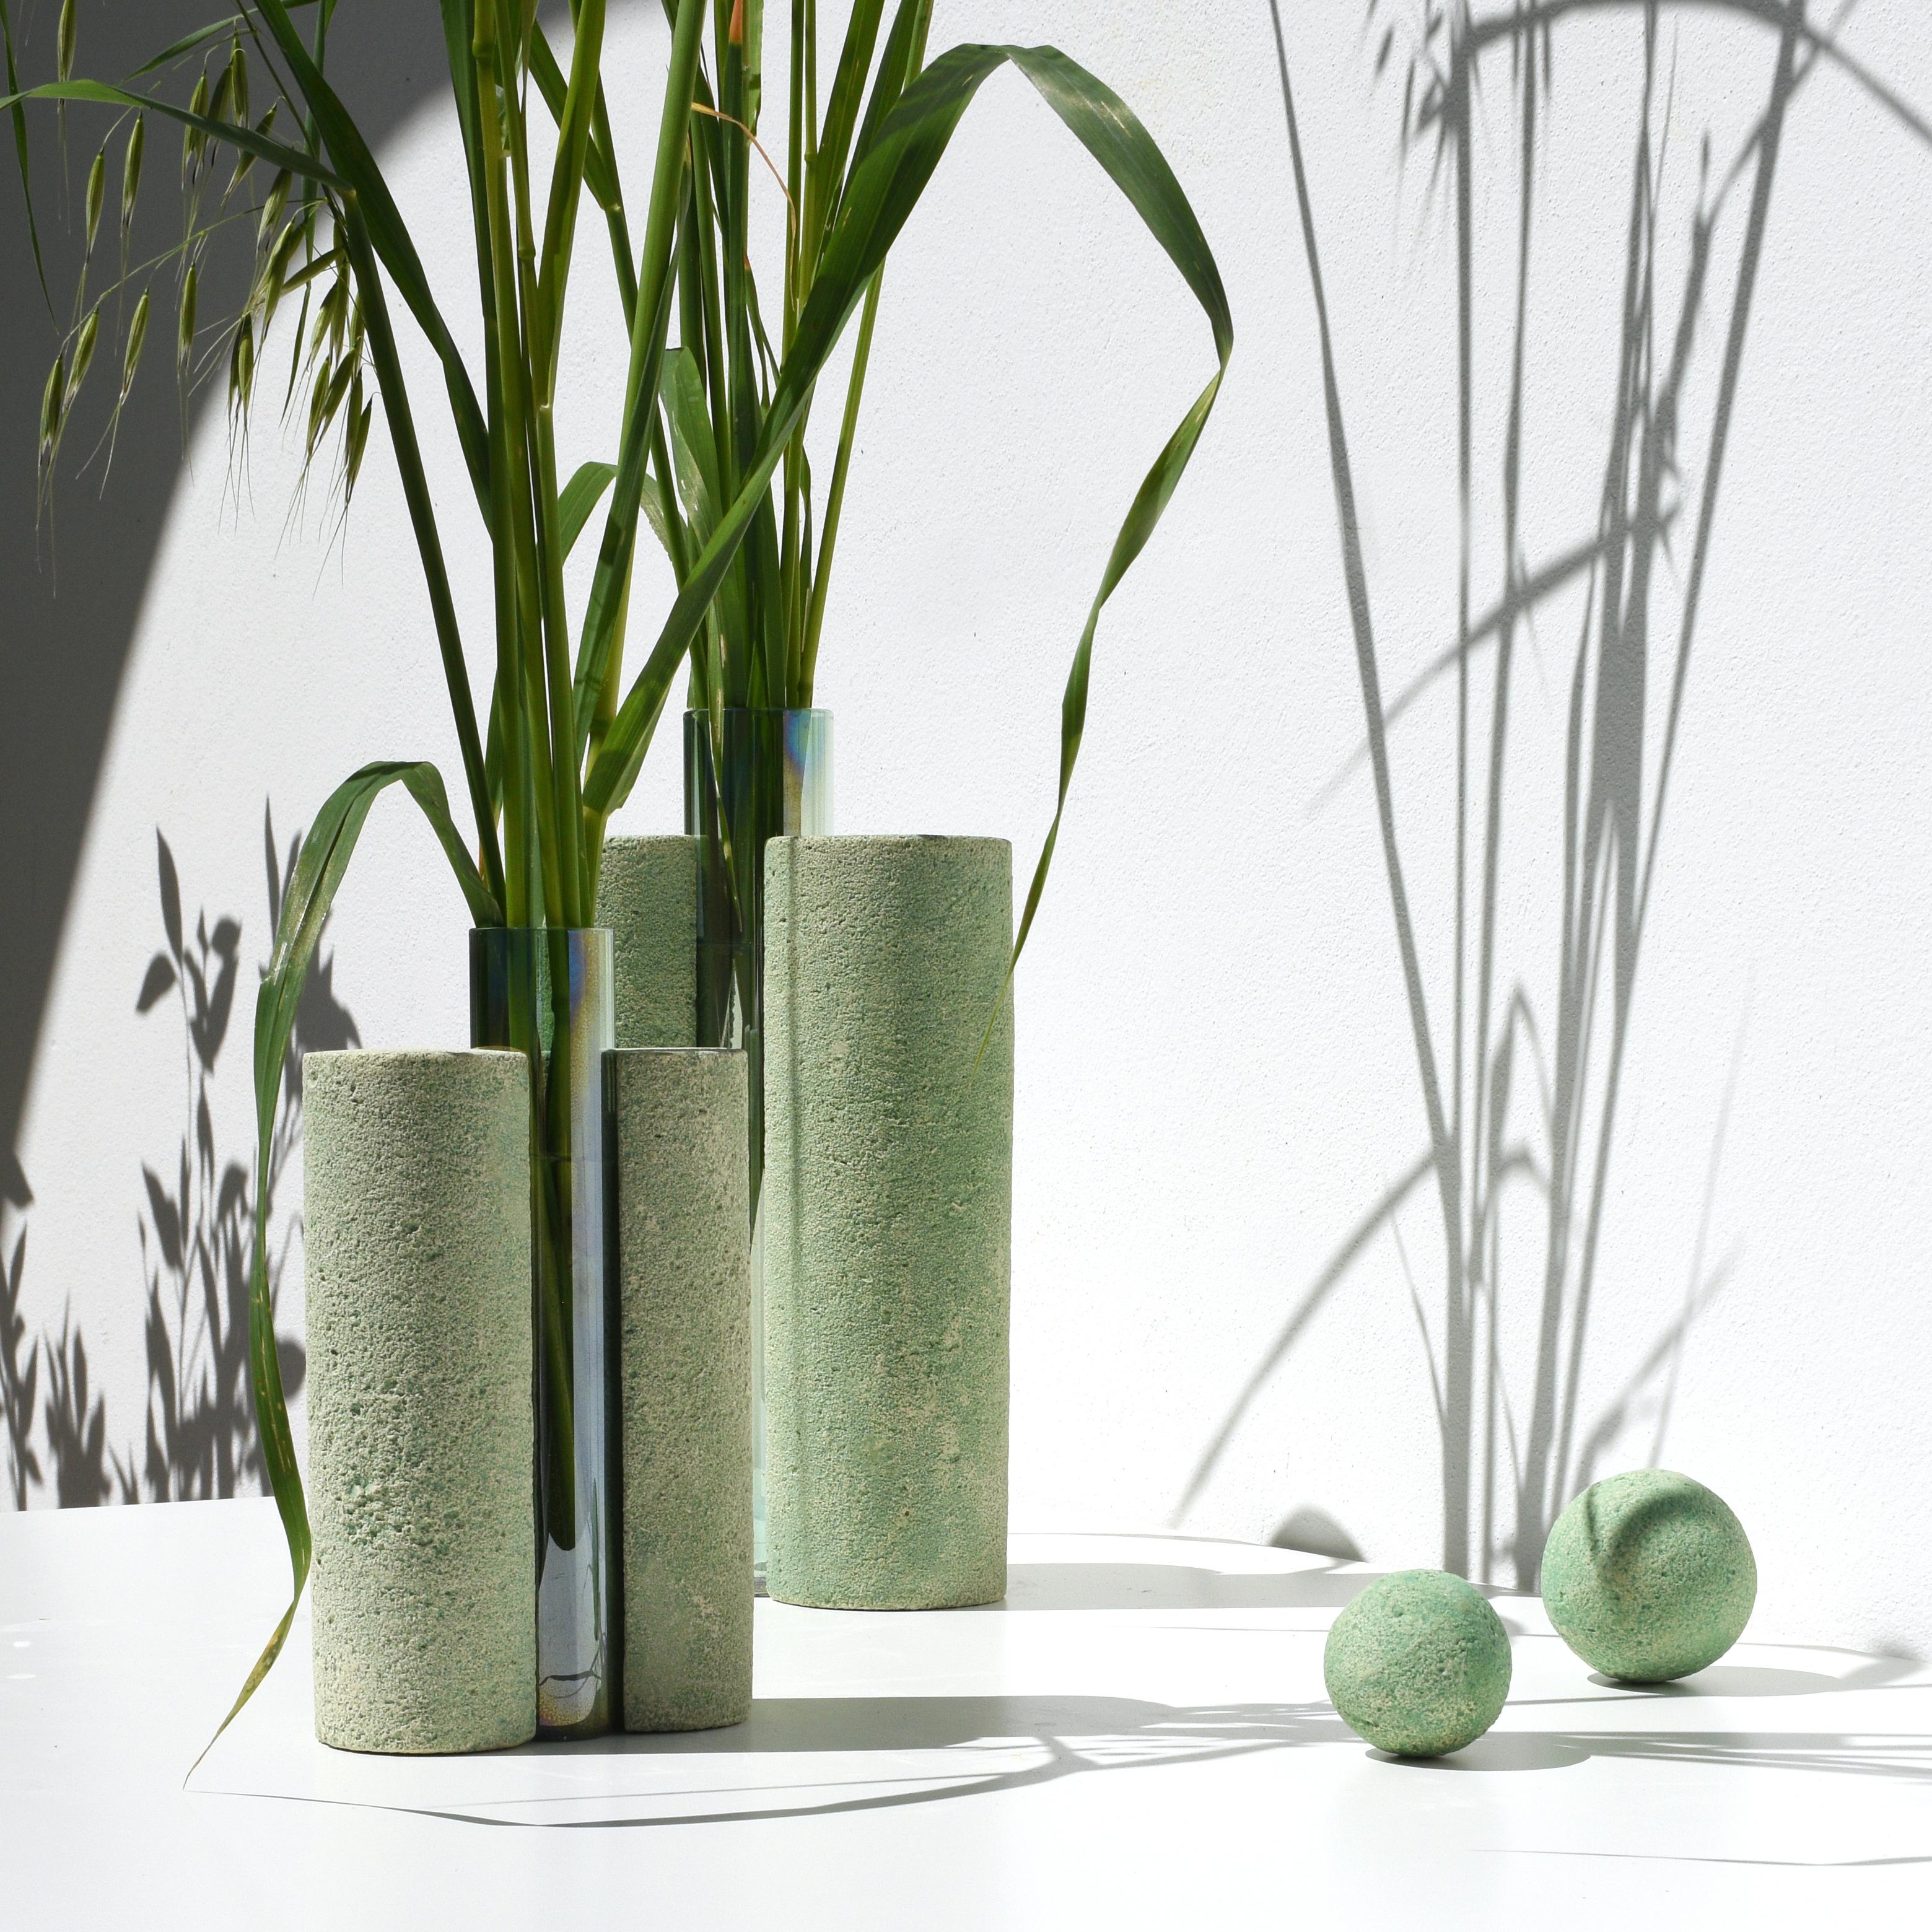 Hand-Crafted Papilio, Contemporary Design, Green Vase by Coki